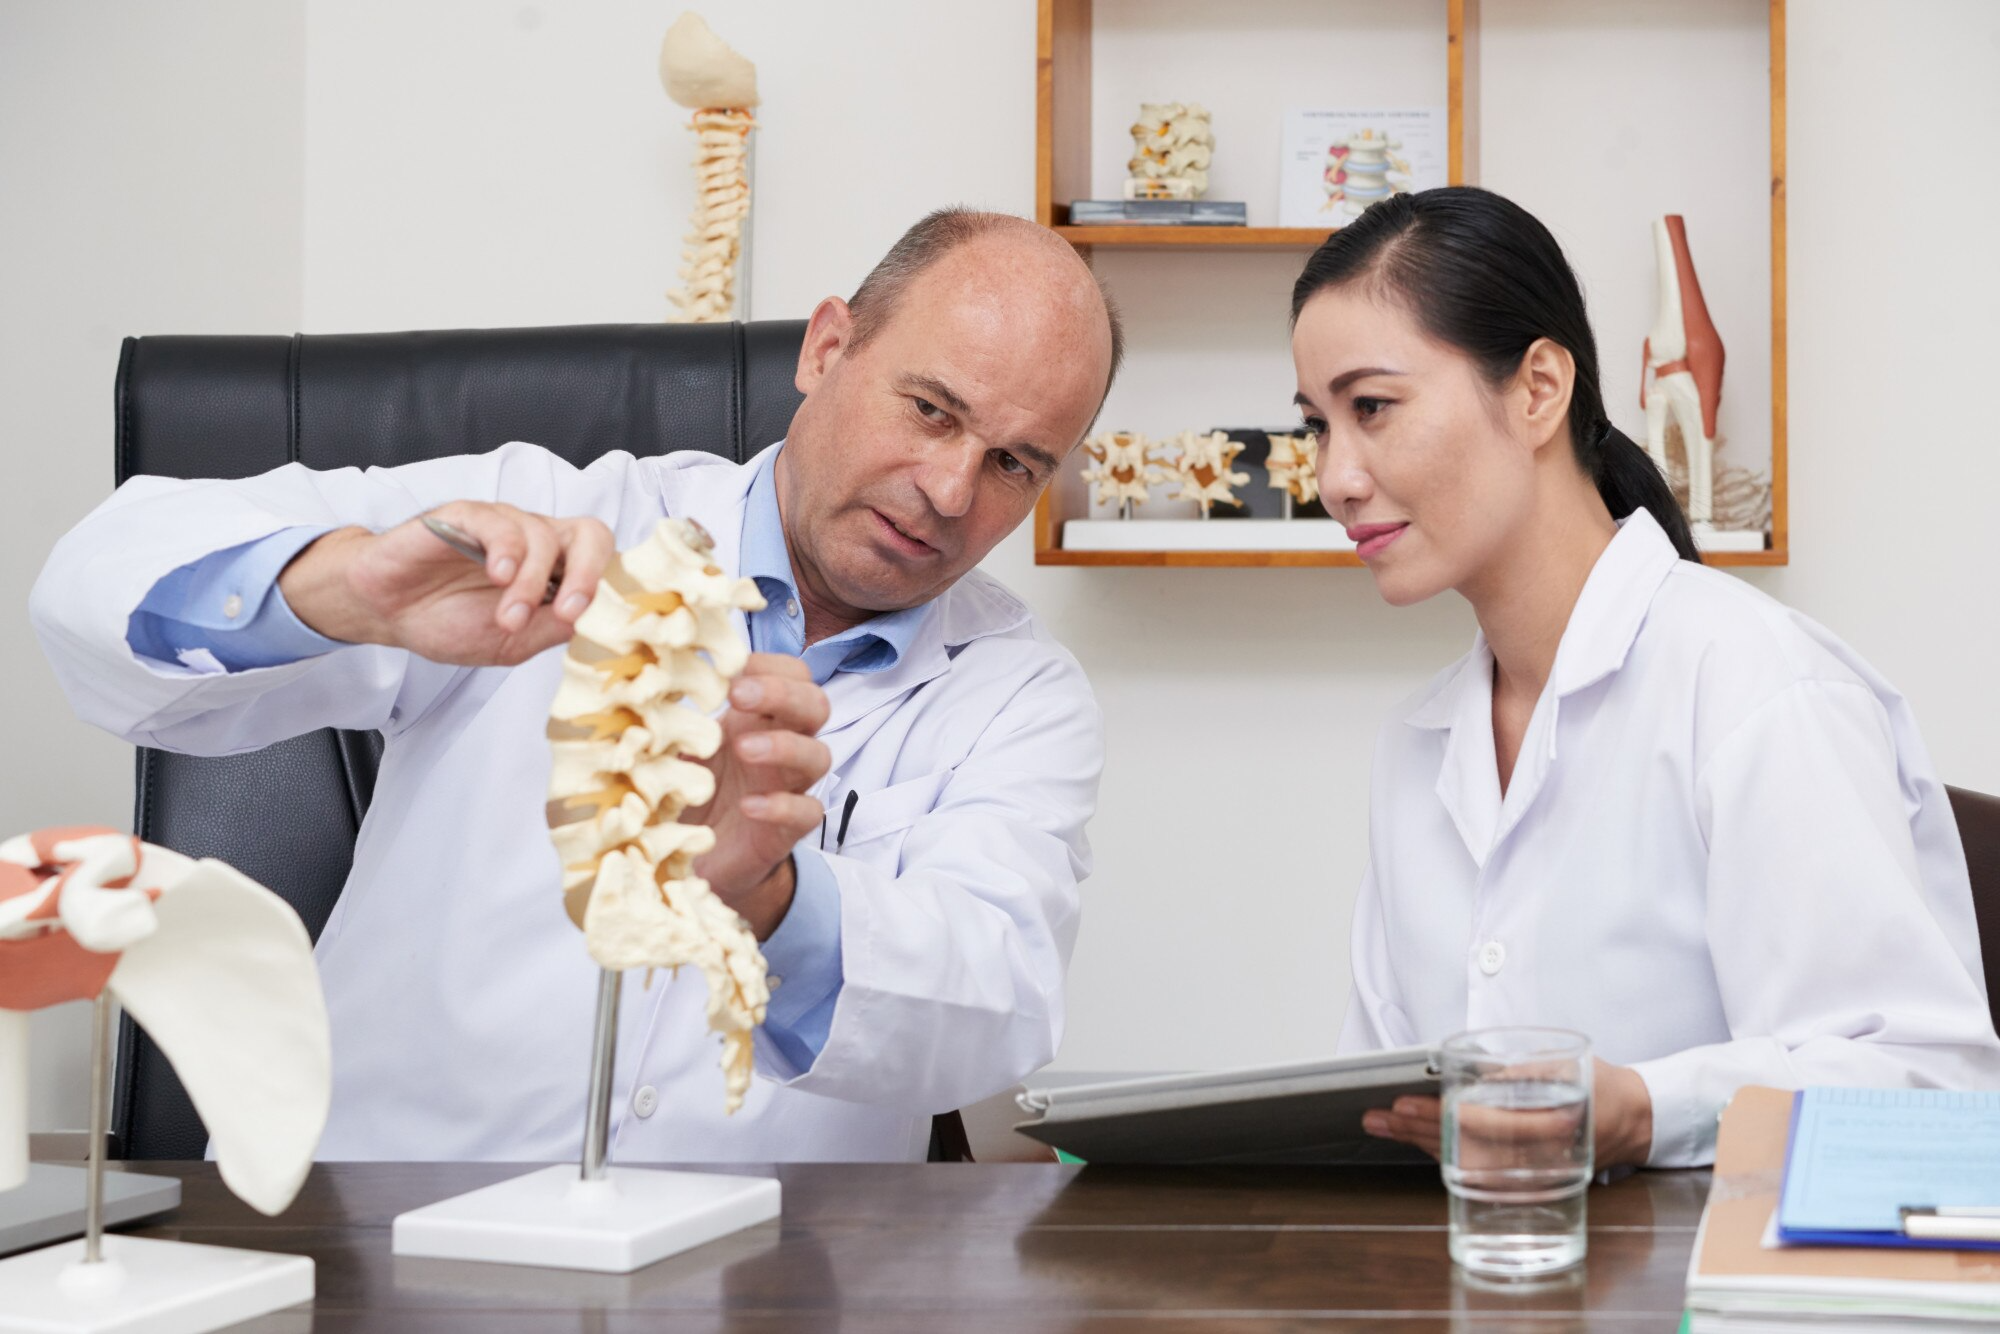 Two doctors and a chiropractor examine a spine model at a desk, with medical books and anatomical models on shelves in the background, discussing possible treatments for back pain following a car accident.